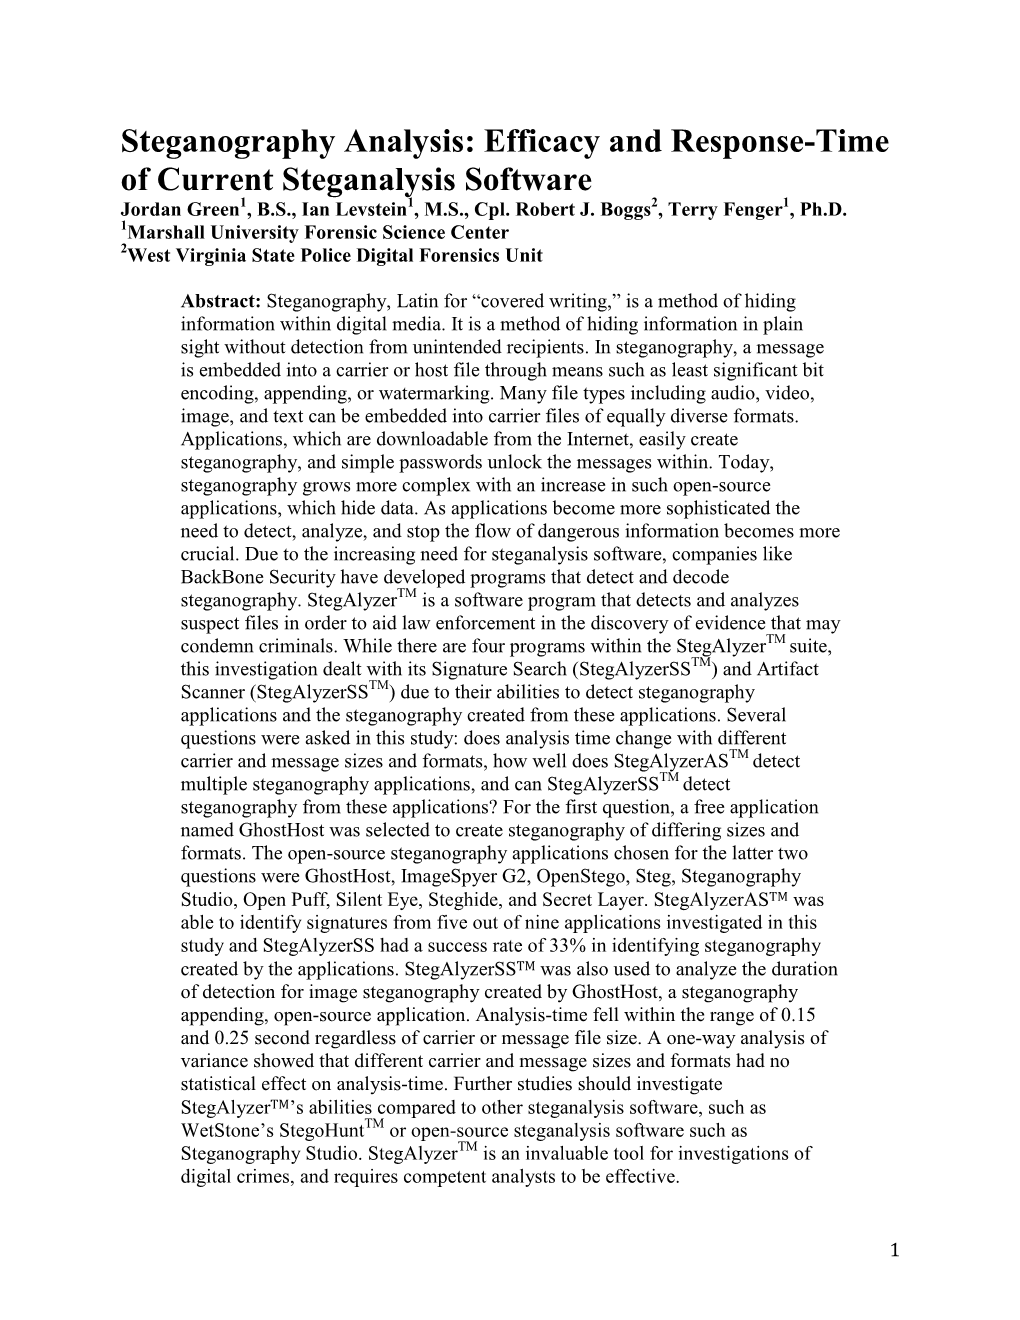 Efficacy and Response-Time of Current Steganalysis Software Jordan Green1, B.S., Ian Levstein1, M.S., Cpl